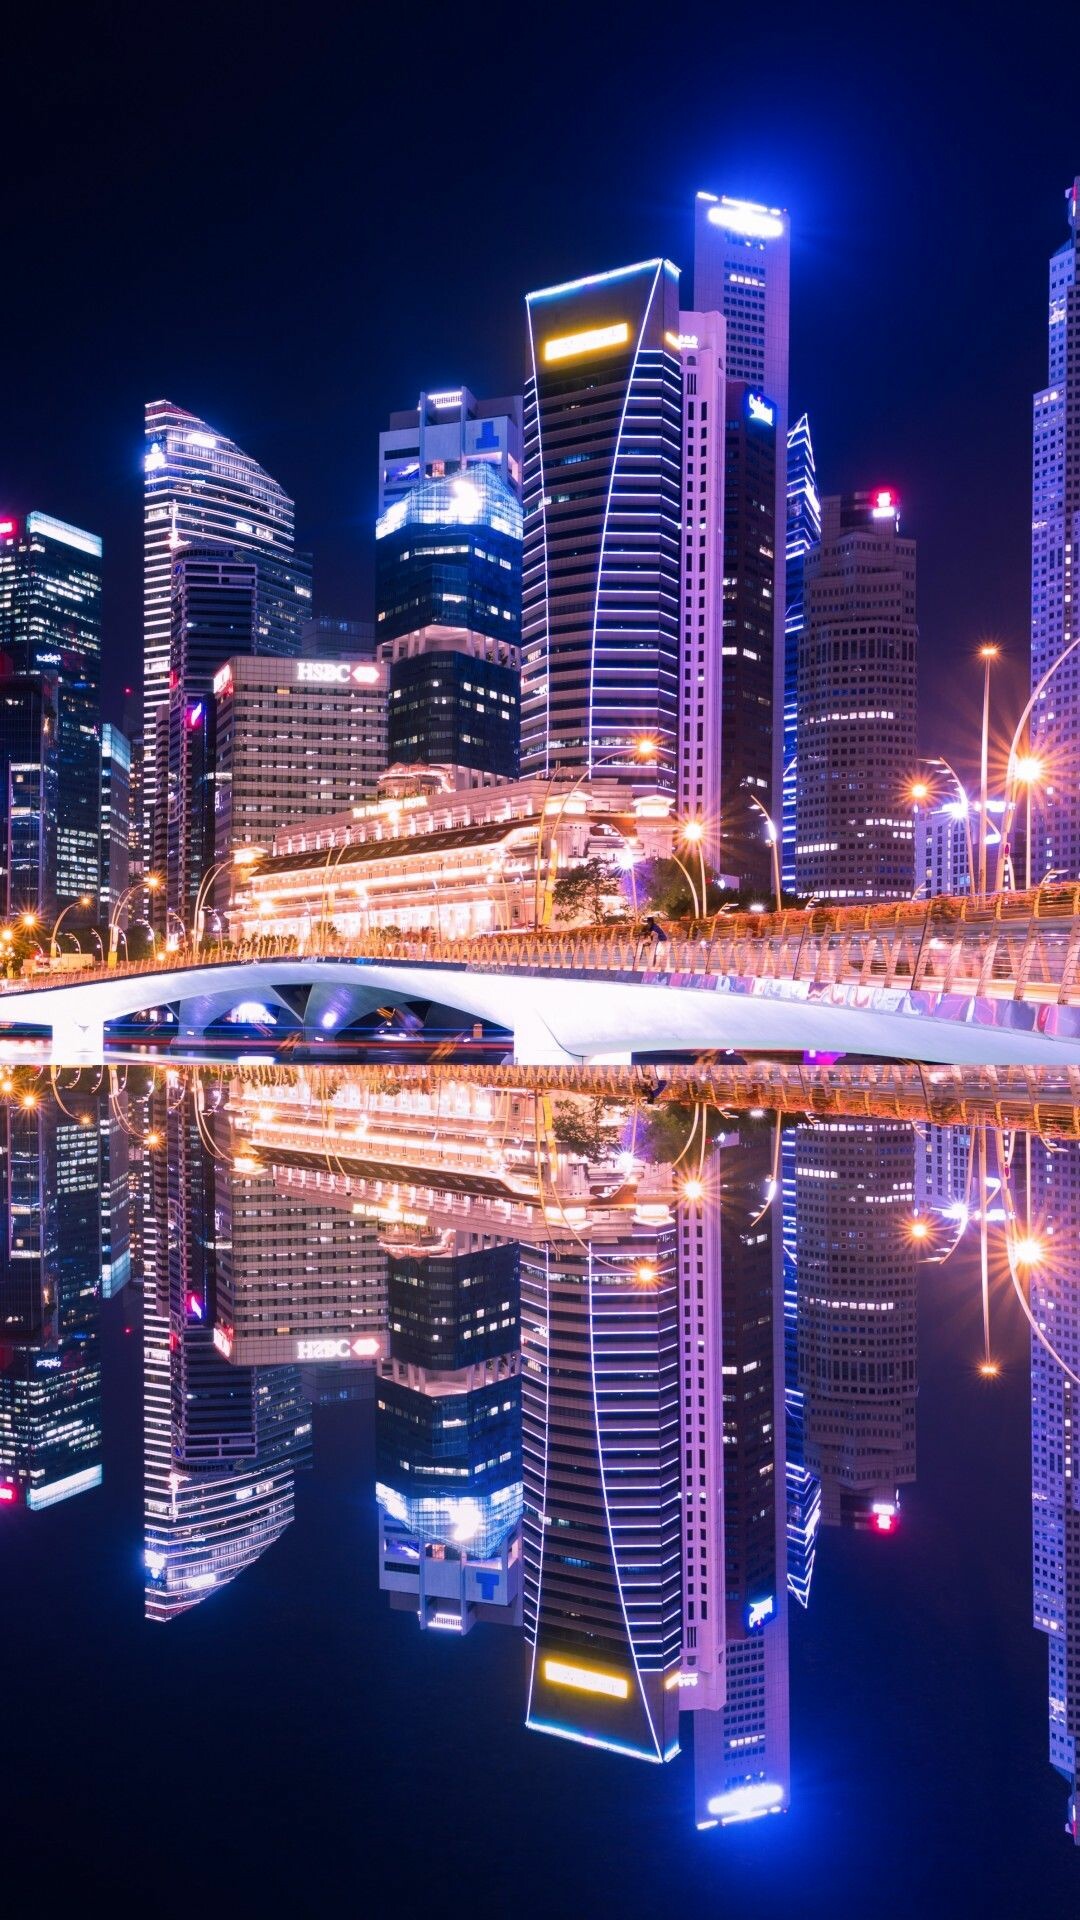 Singapore: City-state in maritime Southeast Asia, Downtown Core. 1080x1920 Full HD Wallpaper.